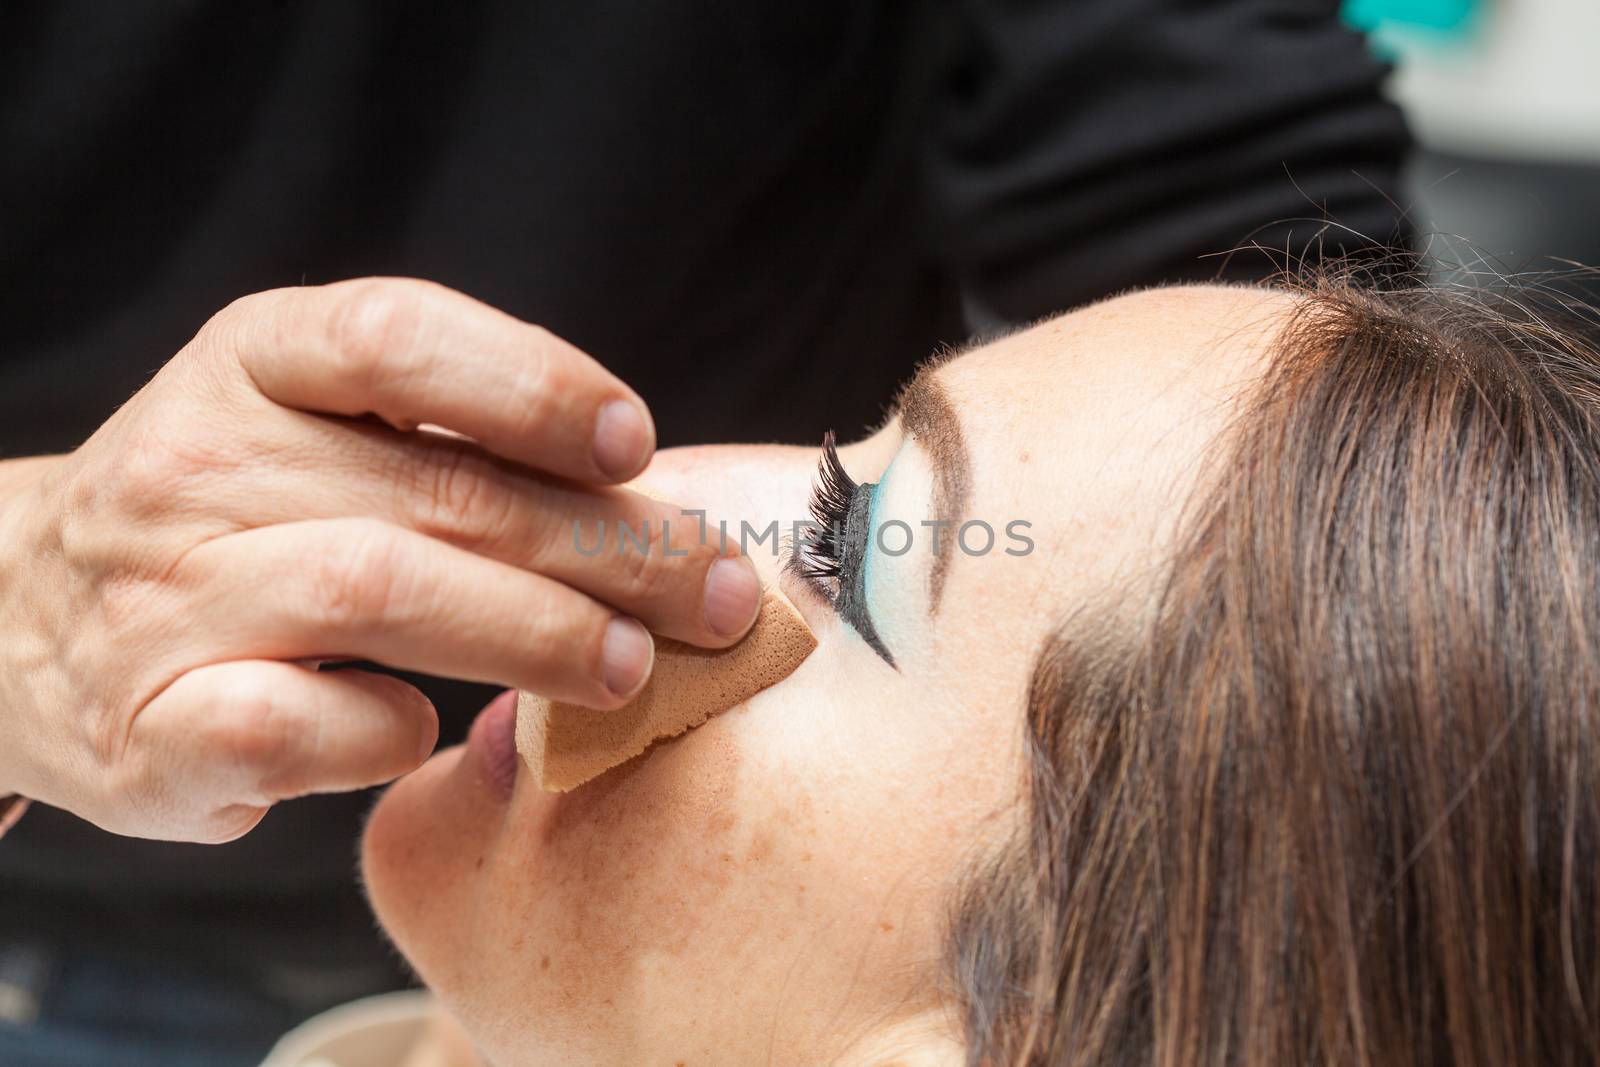 Makeup artist applying foundation using a sponge to a white woman